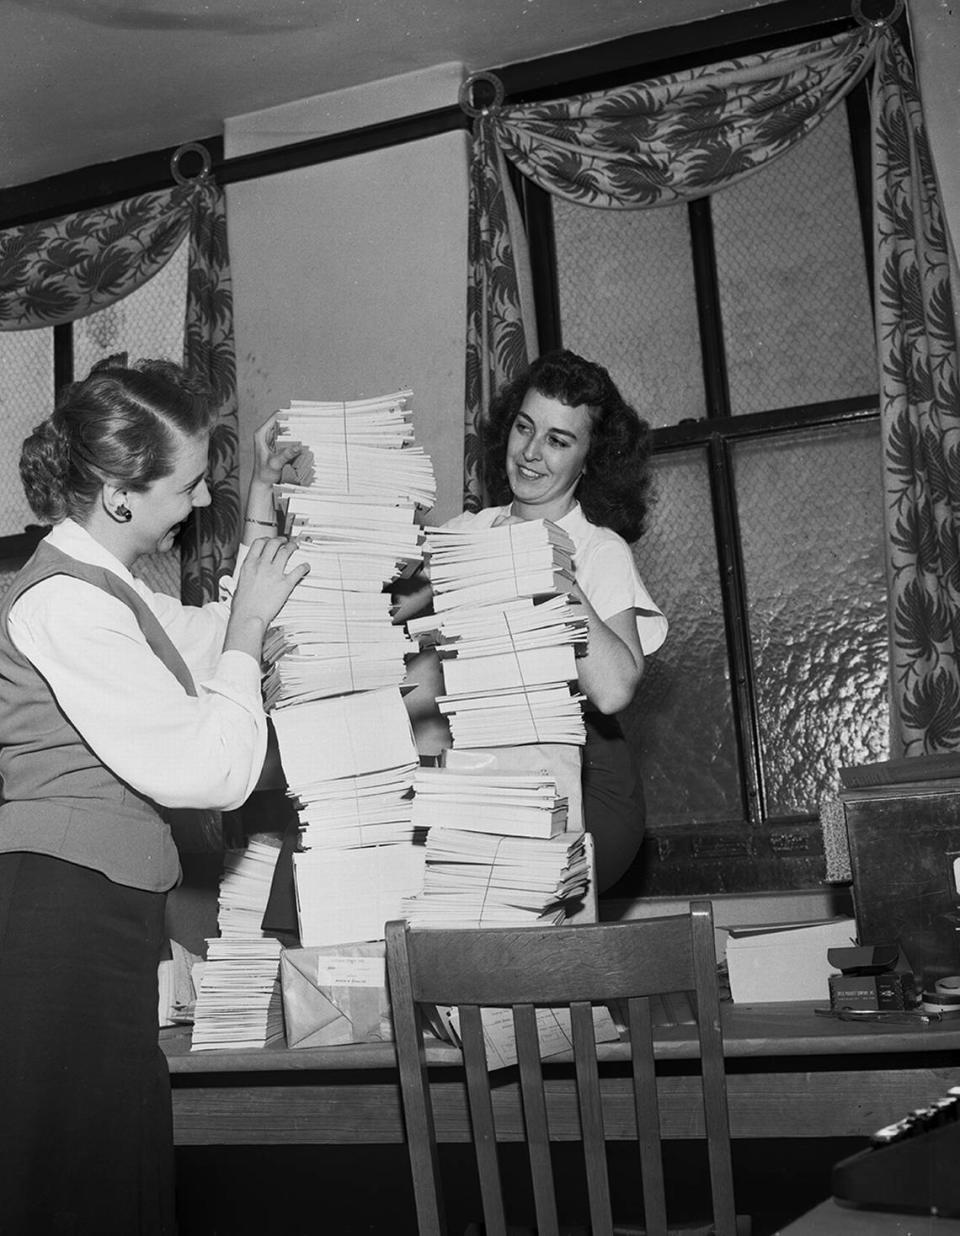 Sept 27, 1950: Mrs. Marilyn Basham; left, and Miss Robbie Barrett, Community Chest clerical workers, exhibit part of the 50,000 pledge cards they and other office workers had typed for the employee division gifts drive. The cards were distributed to team captains in preparation for the kickoff of the employee division drive.